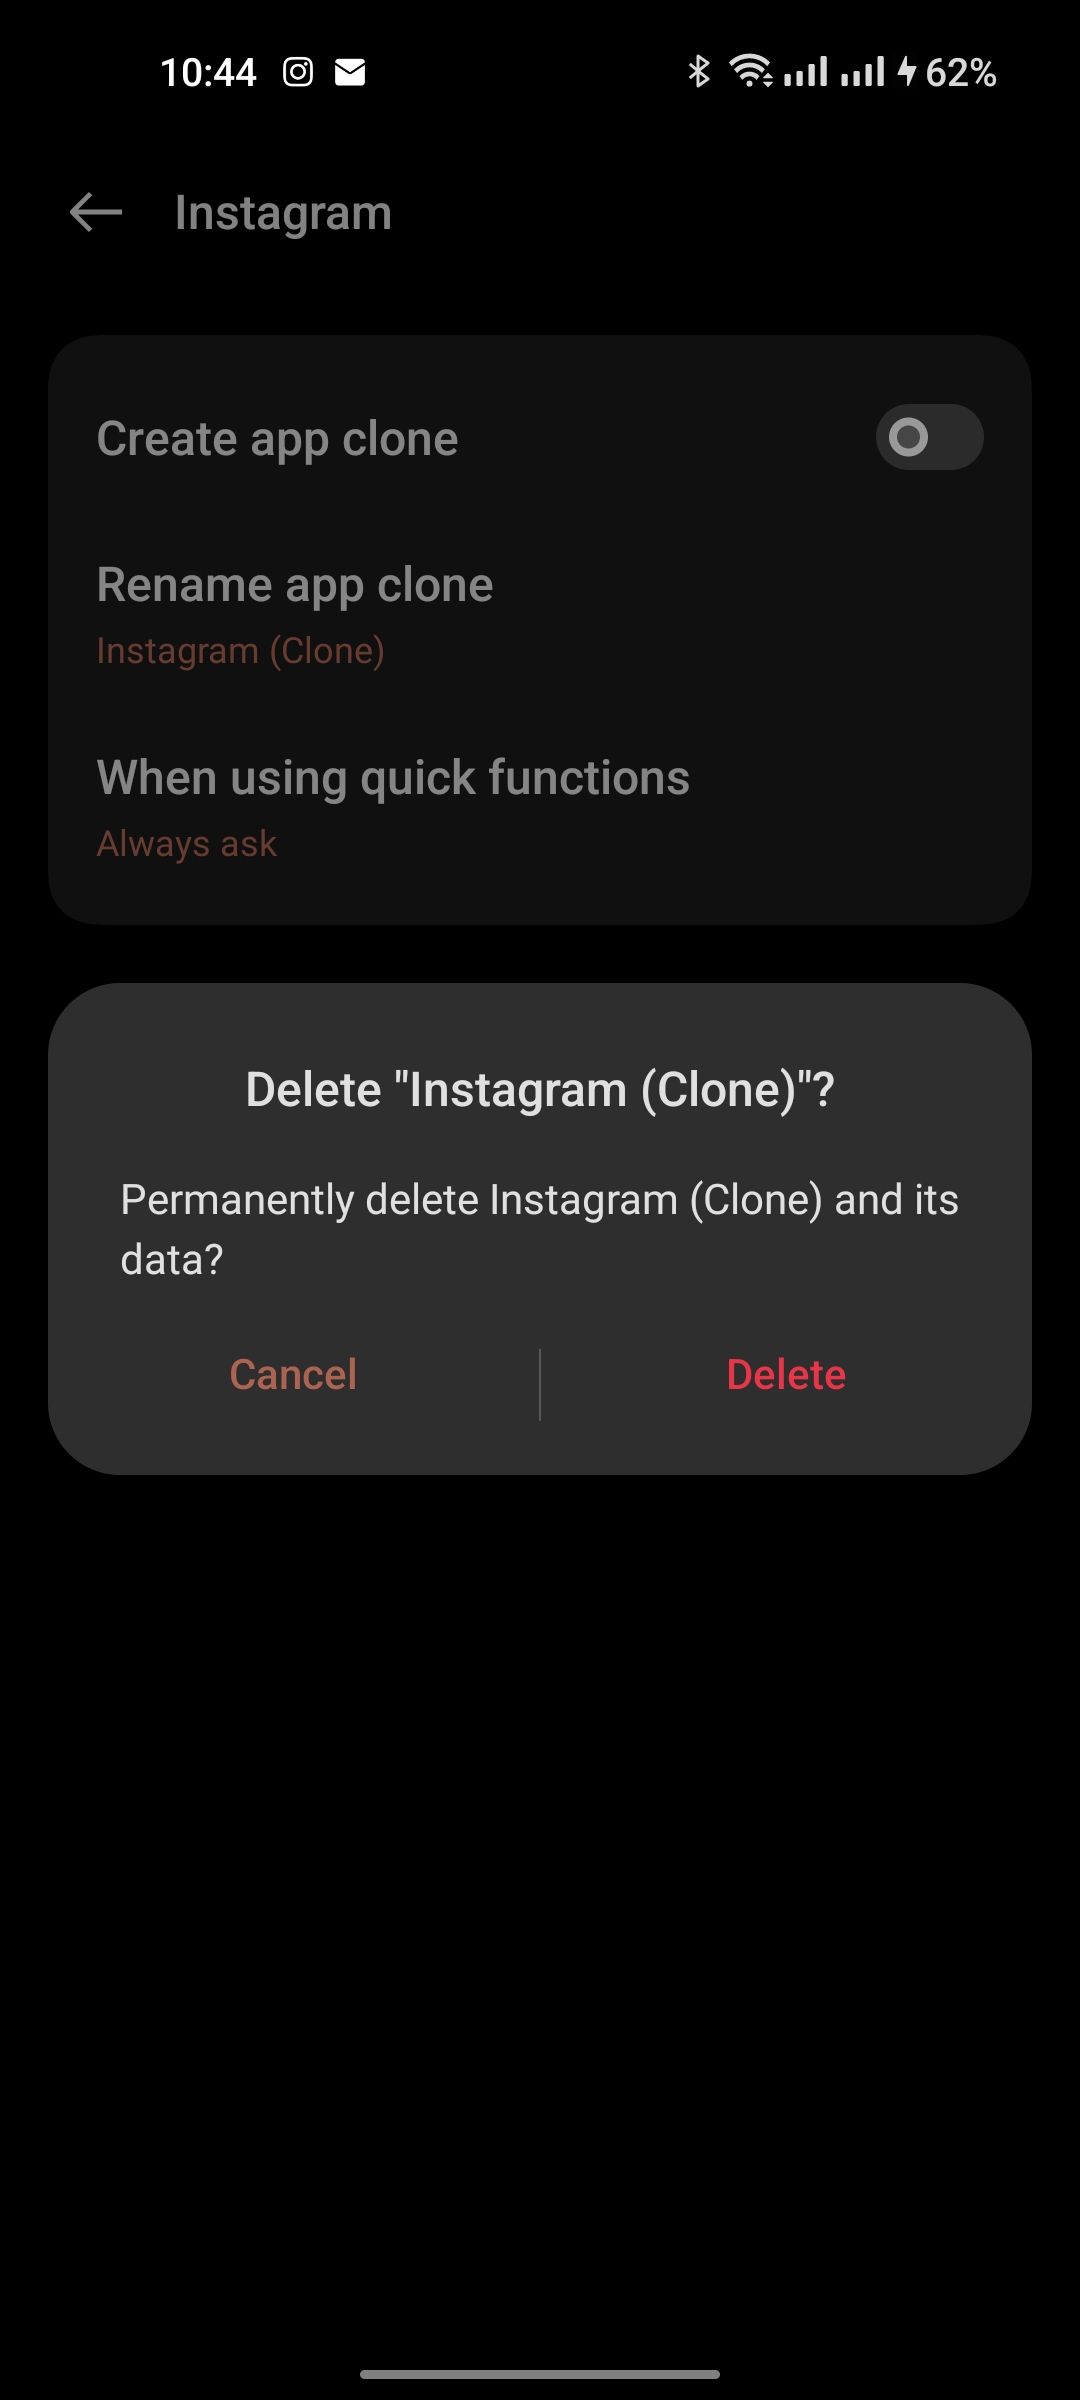 Deleting a clone of Instagram